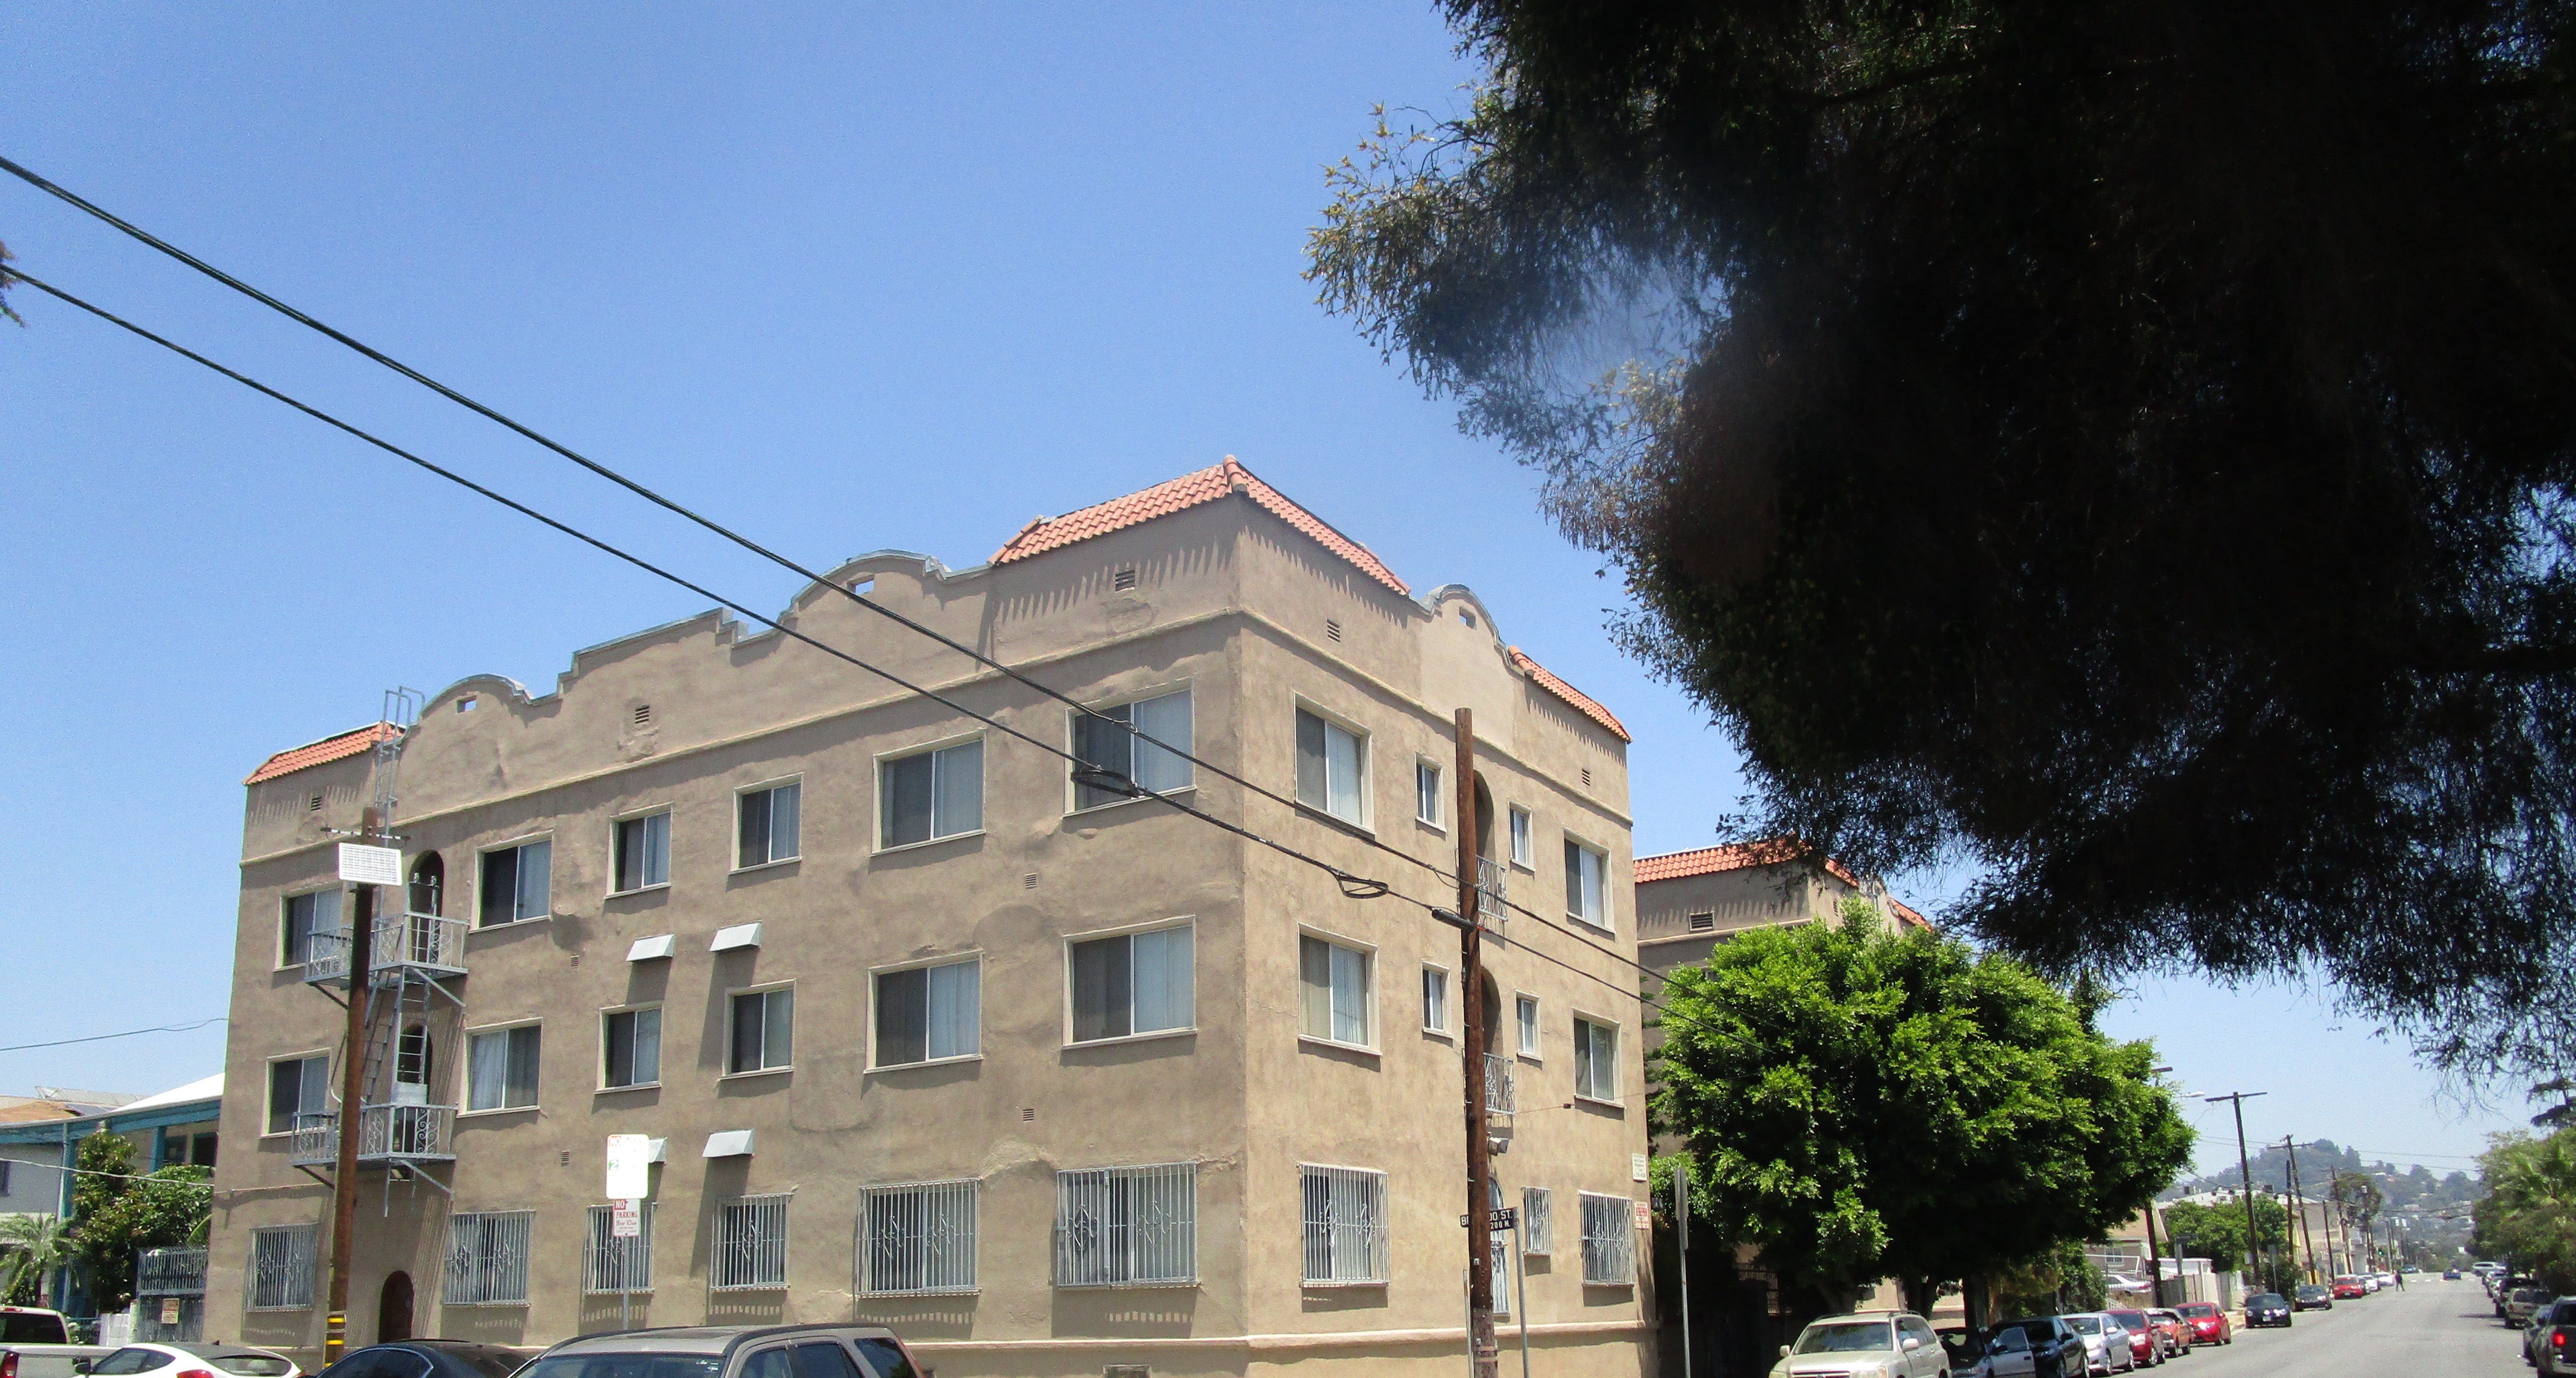 Corner view of the tan three floor building, multiple white windows, the bottom floor gated, Emergency stairs on one side, little brick style roof, to the right side part of the second building, two tall trees between the two buildings, light poles, cars